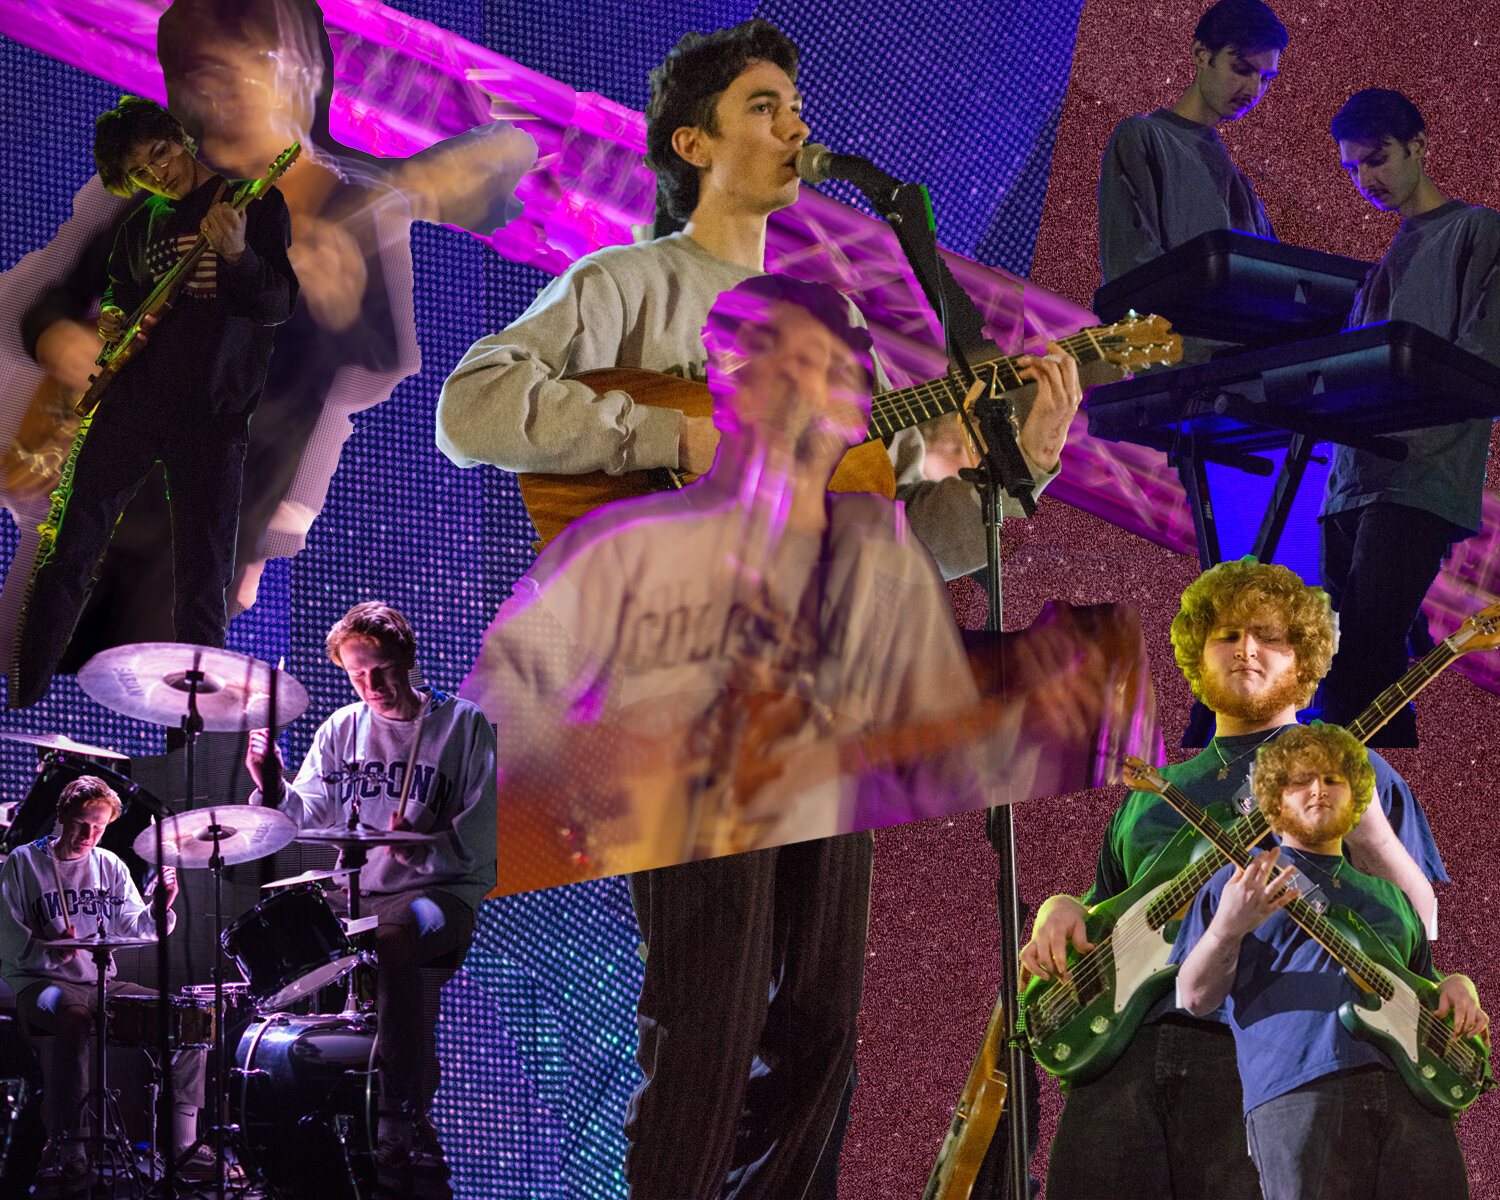  Sarah and the Sundays, made from photos taken in March 2020. 